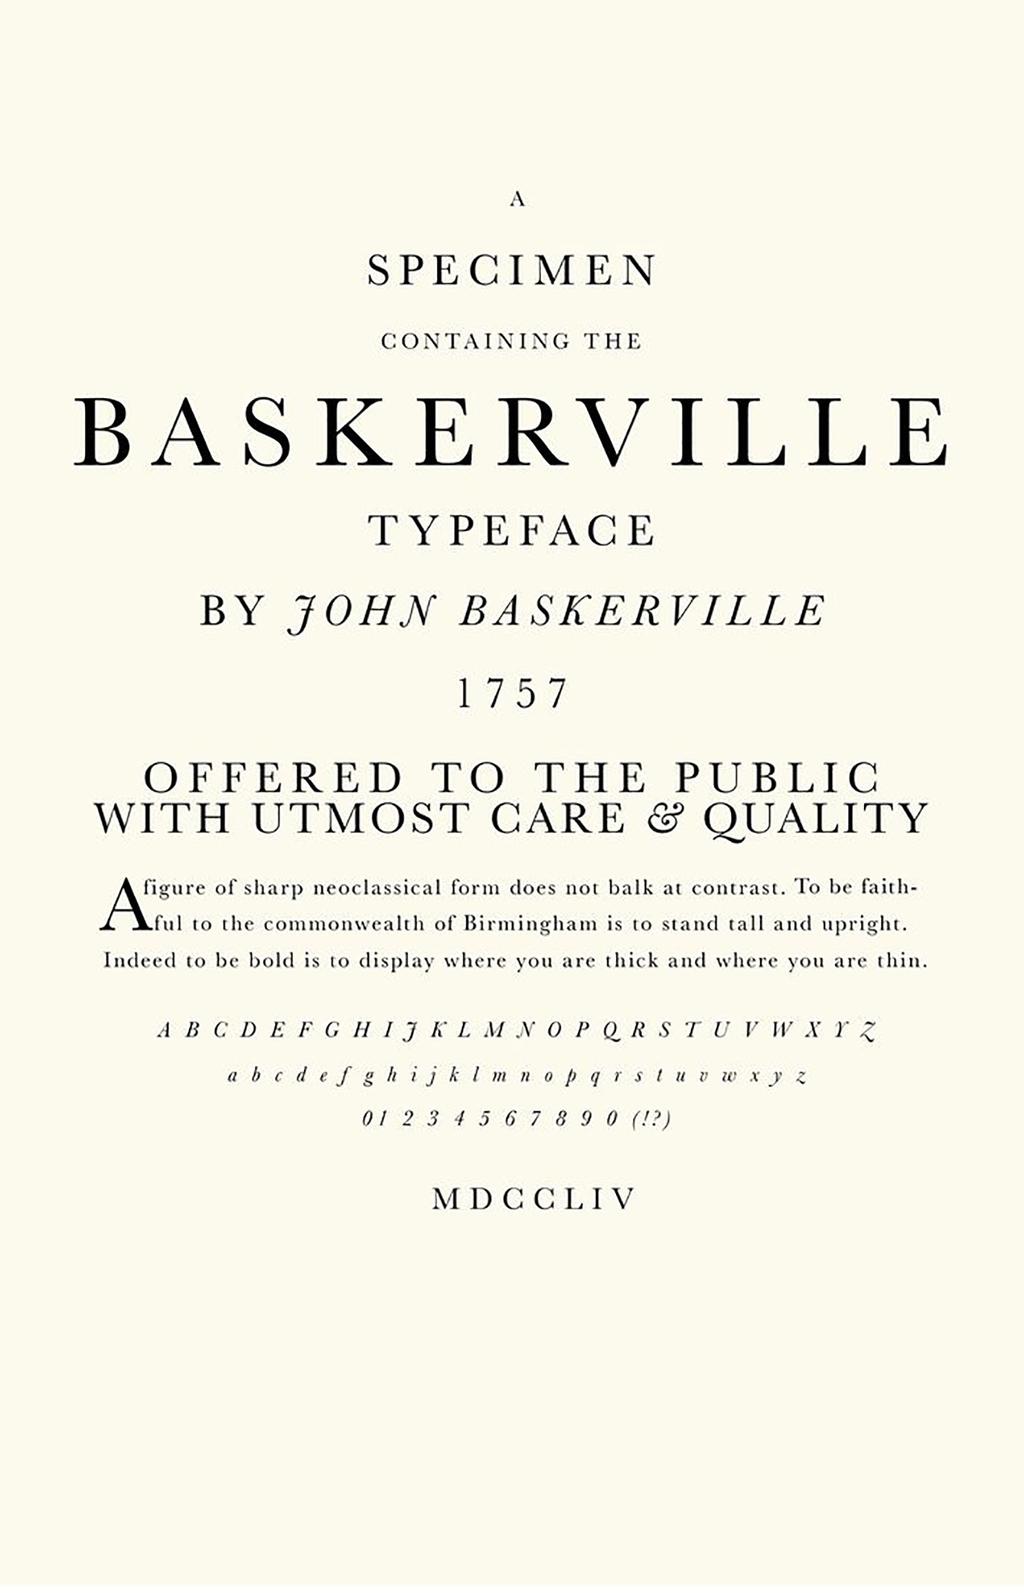 Baskerville aimed to surpass Caslon by creating sharply detailed letters with more vivid contrast between thick and thin